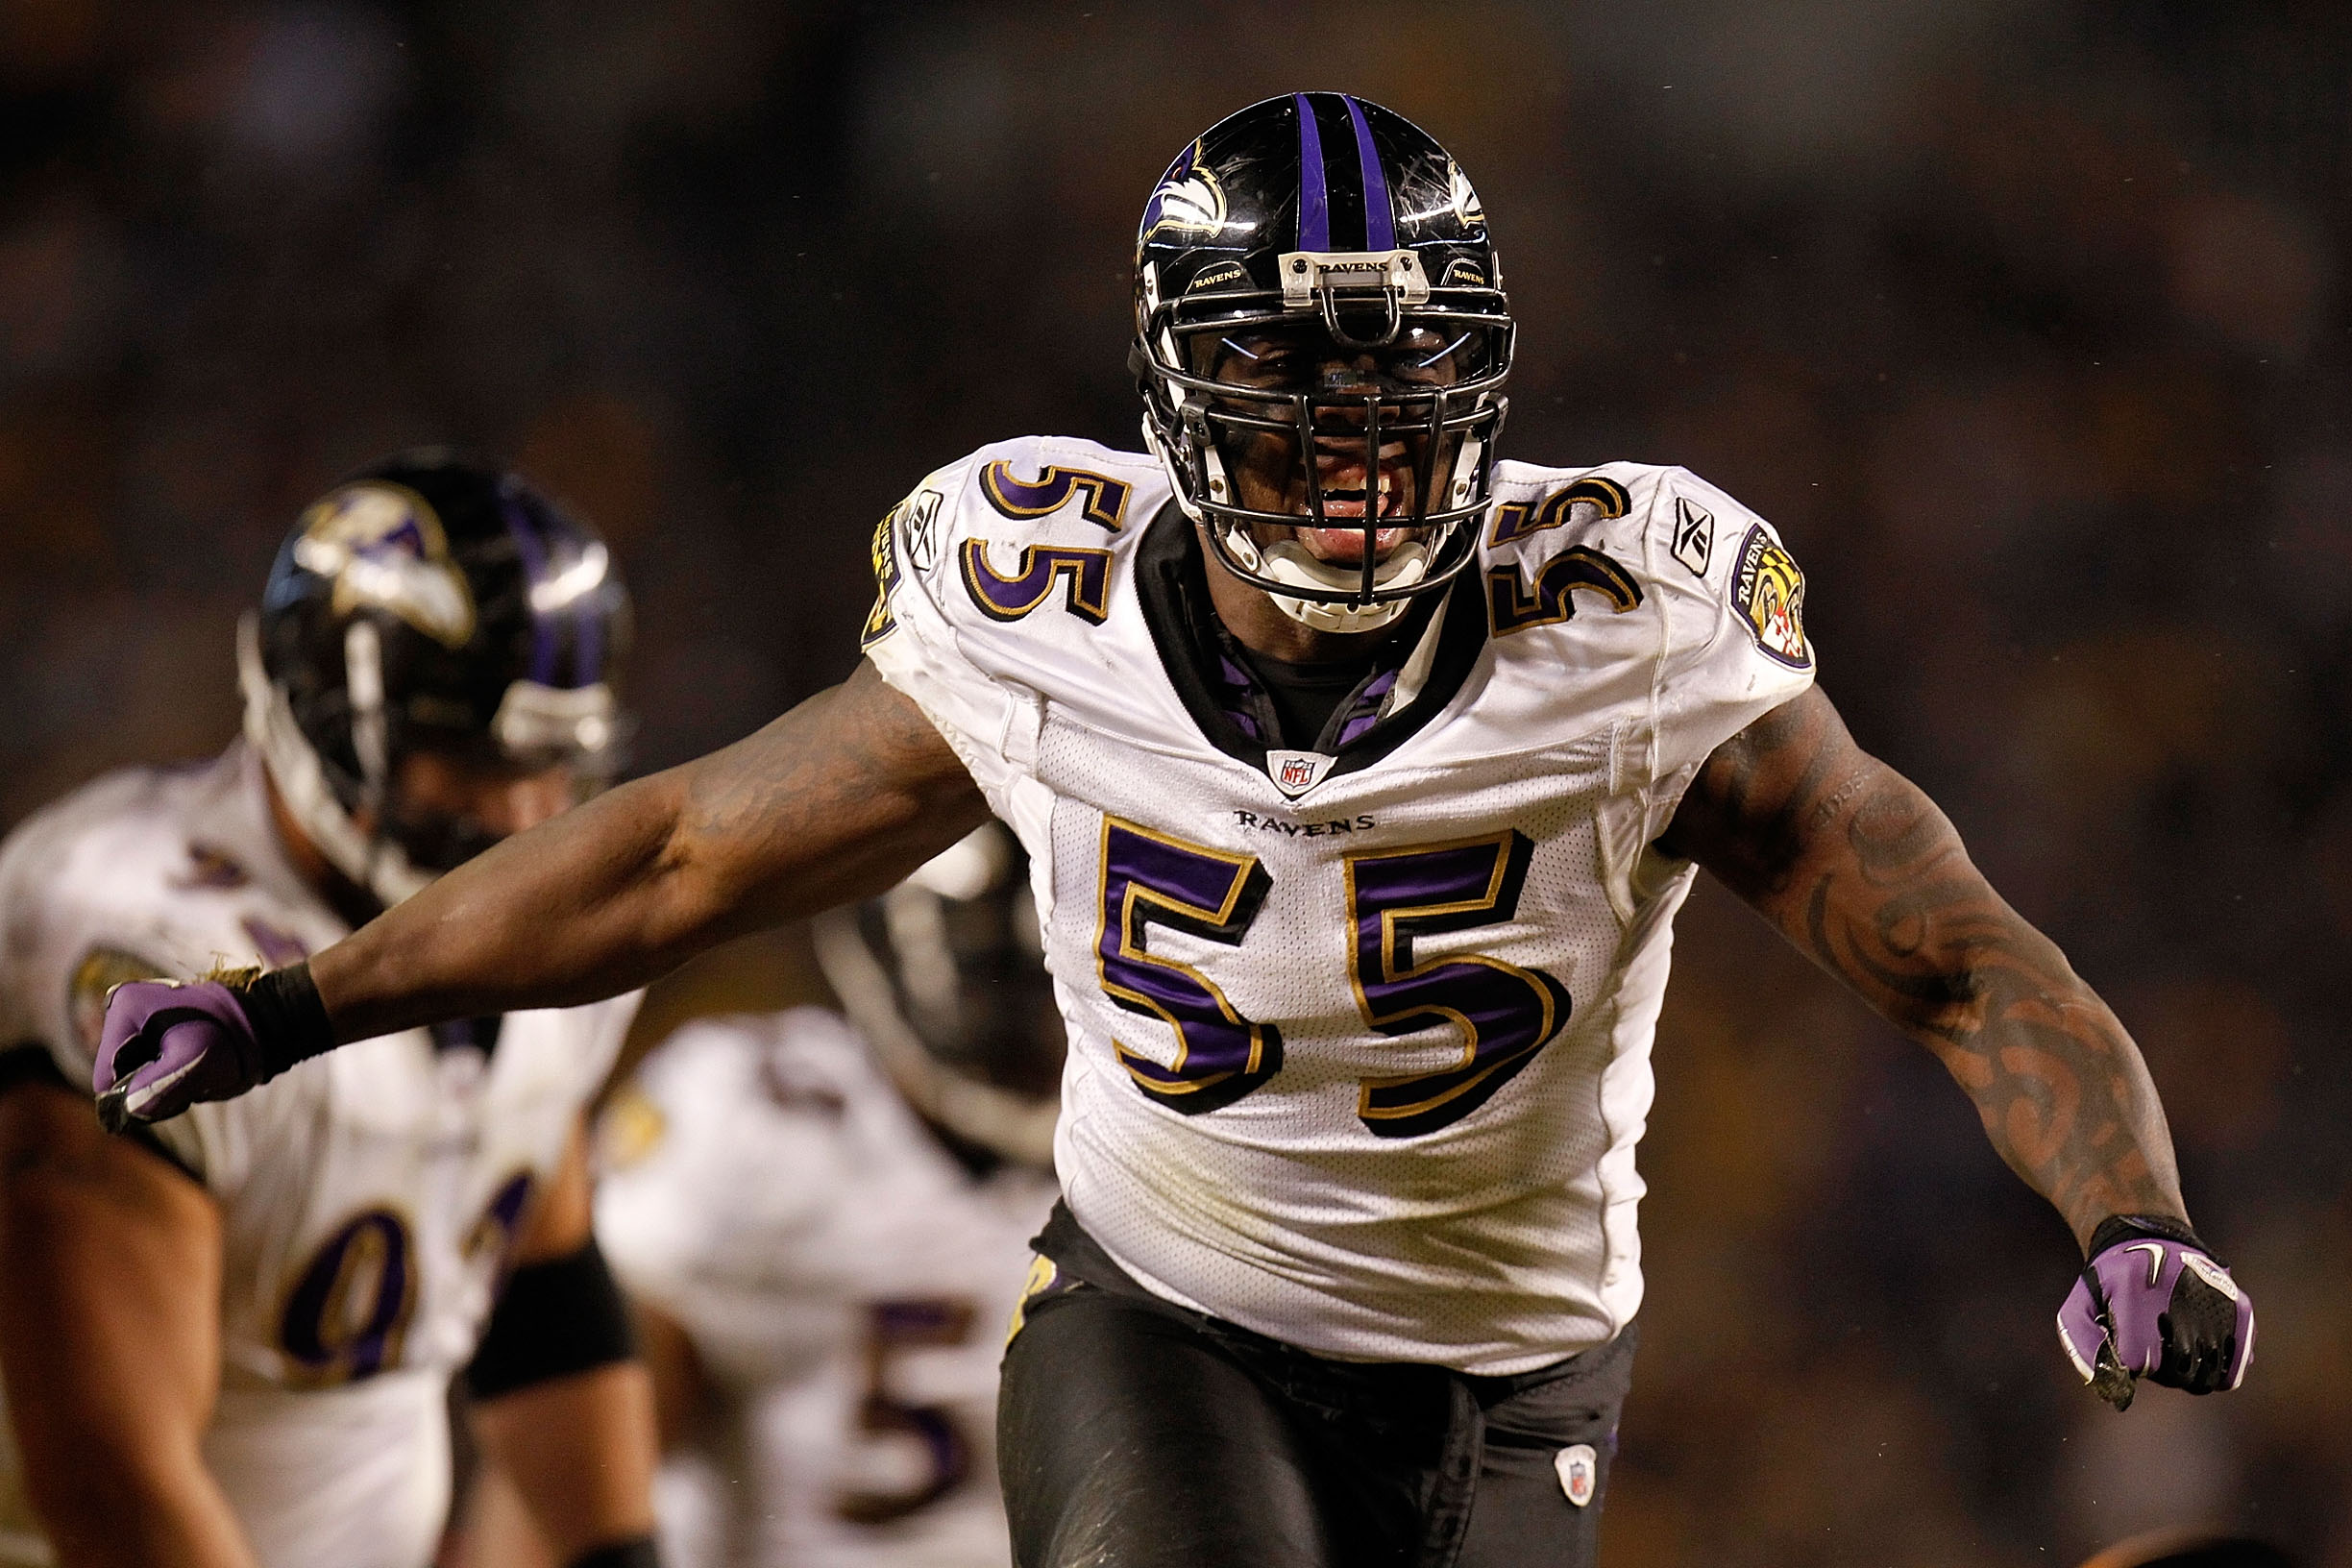 PITTSBURGH, PA - JANUARY 15:  Linebacker Terrell Suggs #55 of the Baltimore Ravens reacts after a play against the Pittsburgh Steelers during the AFC Divisional Playoff Game at Heinz Field on January 15, 2011 in Pittsburgh, Pennsylvania.  (Photo by Gregor